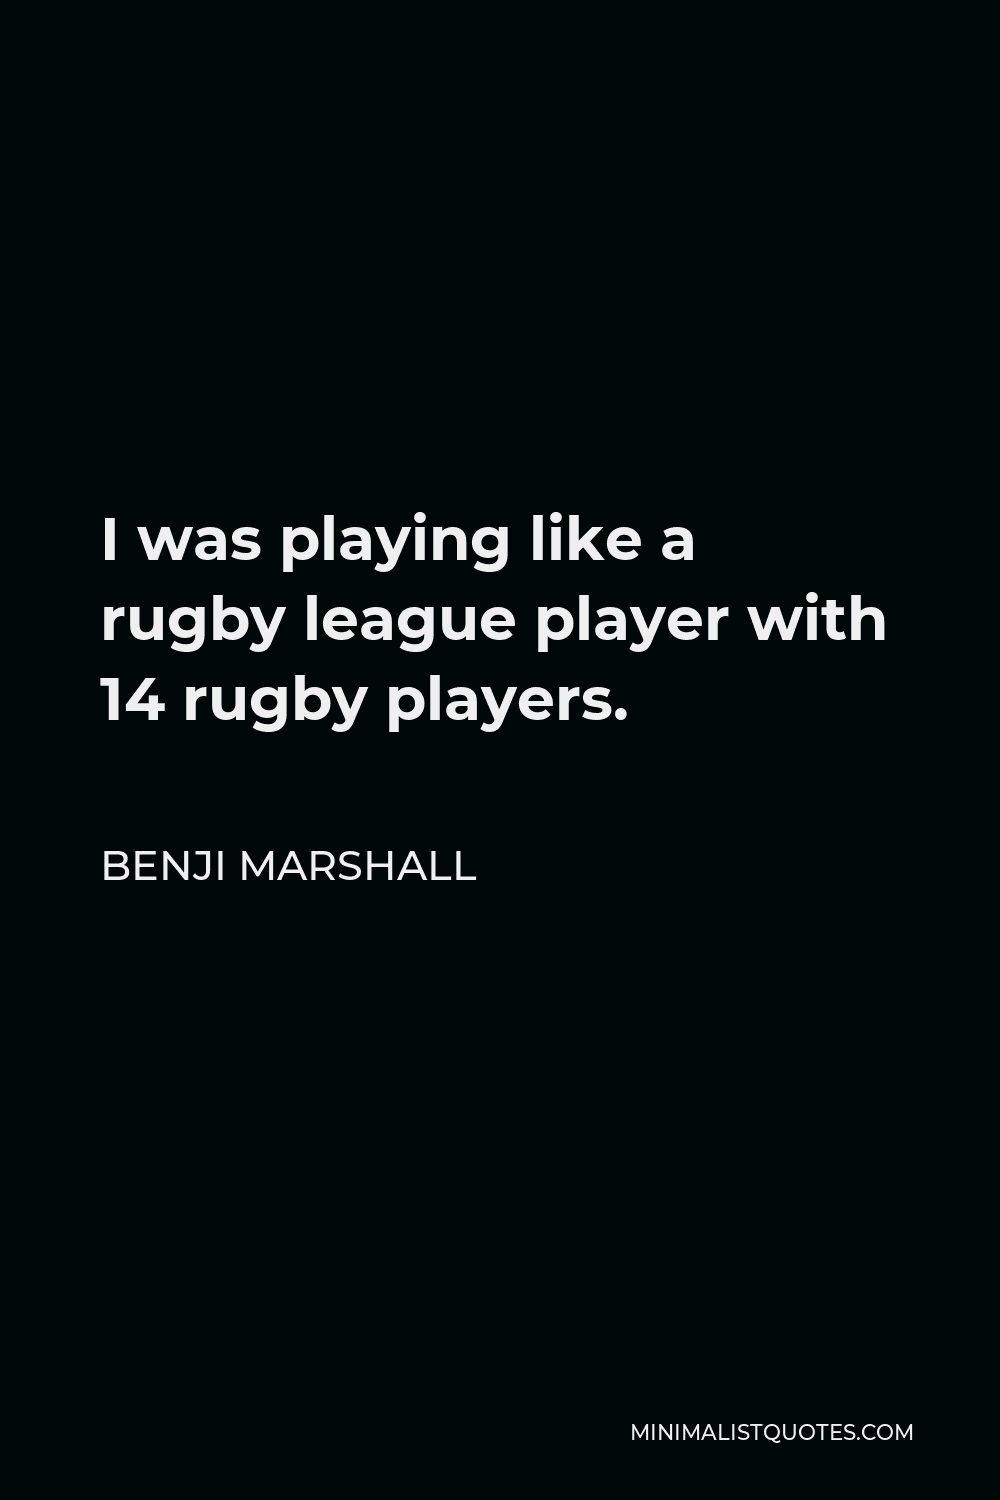 Benji Marshall Quote - I was playing like a rugby league player with 14 rugby players.